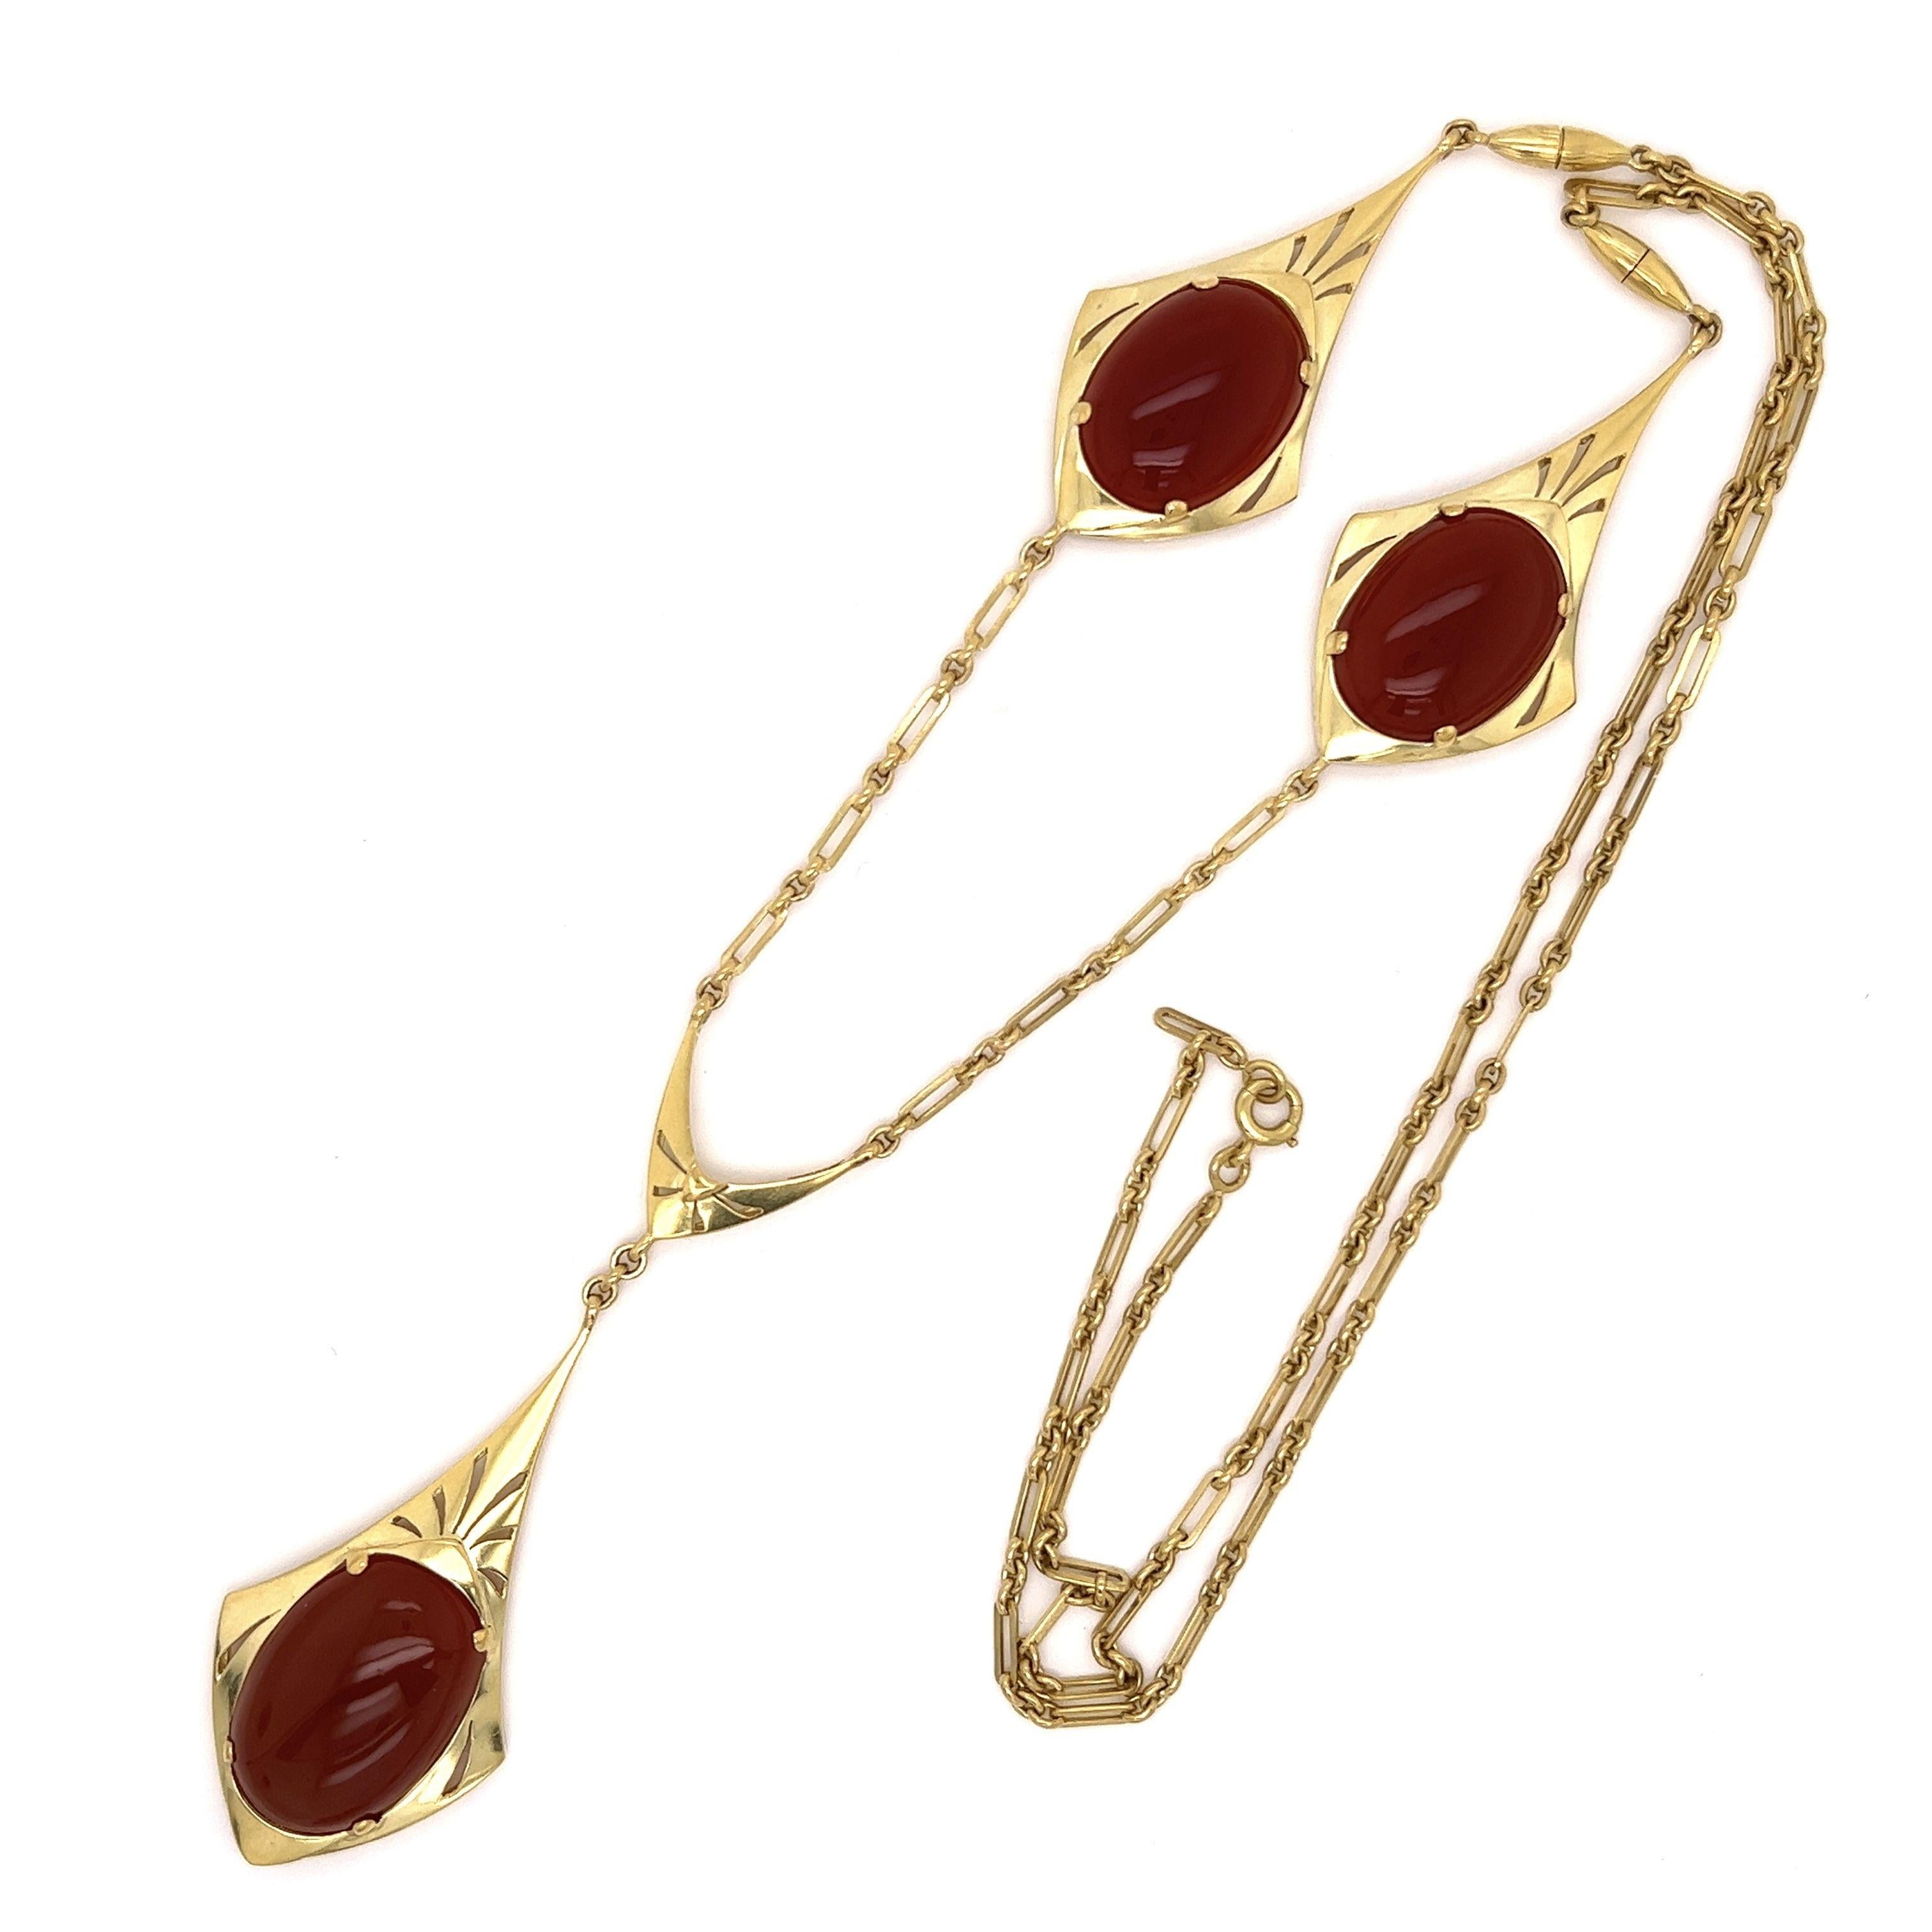 Triple Carnelian Art Deco Gold Drop Lavaliere Necklace In Excellent Condition For Sale In Montreal, QC